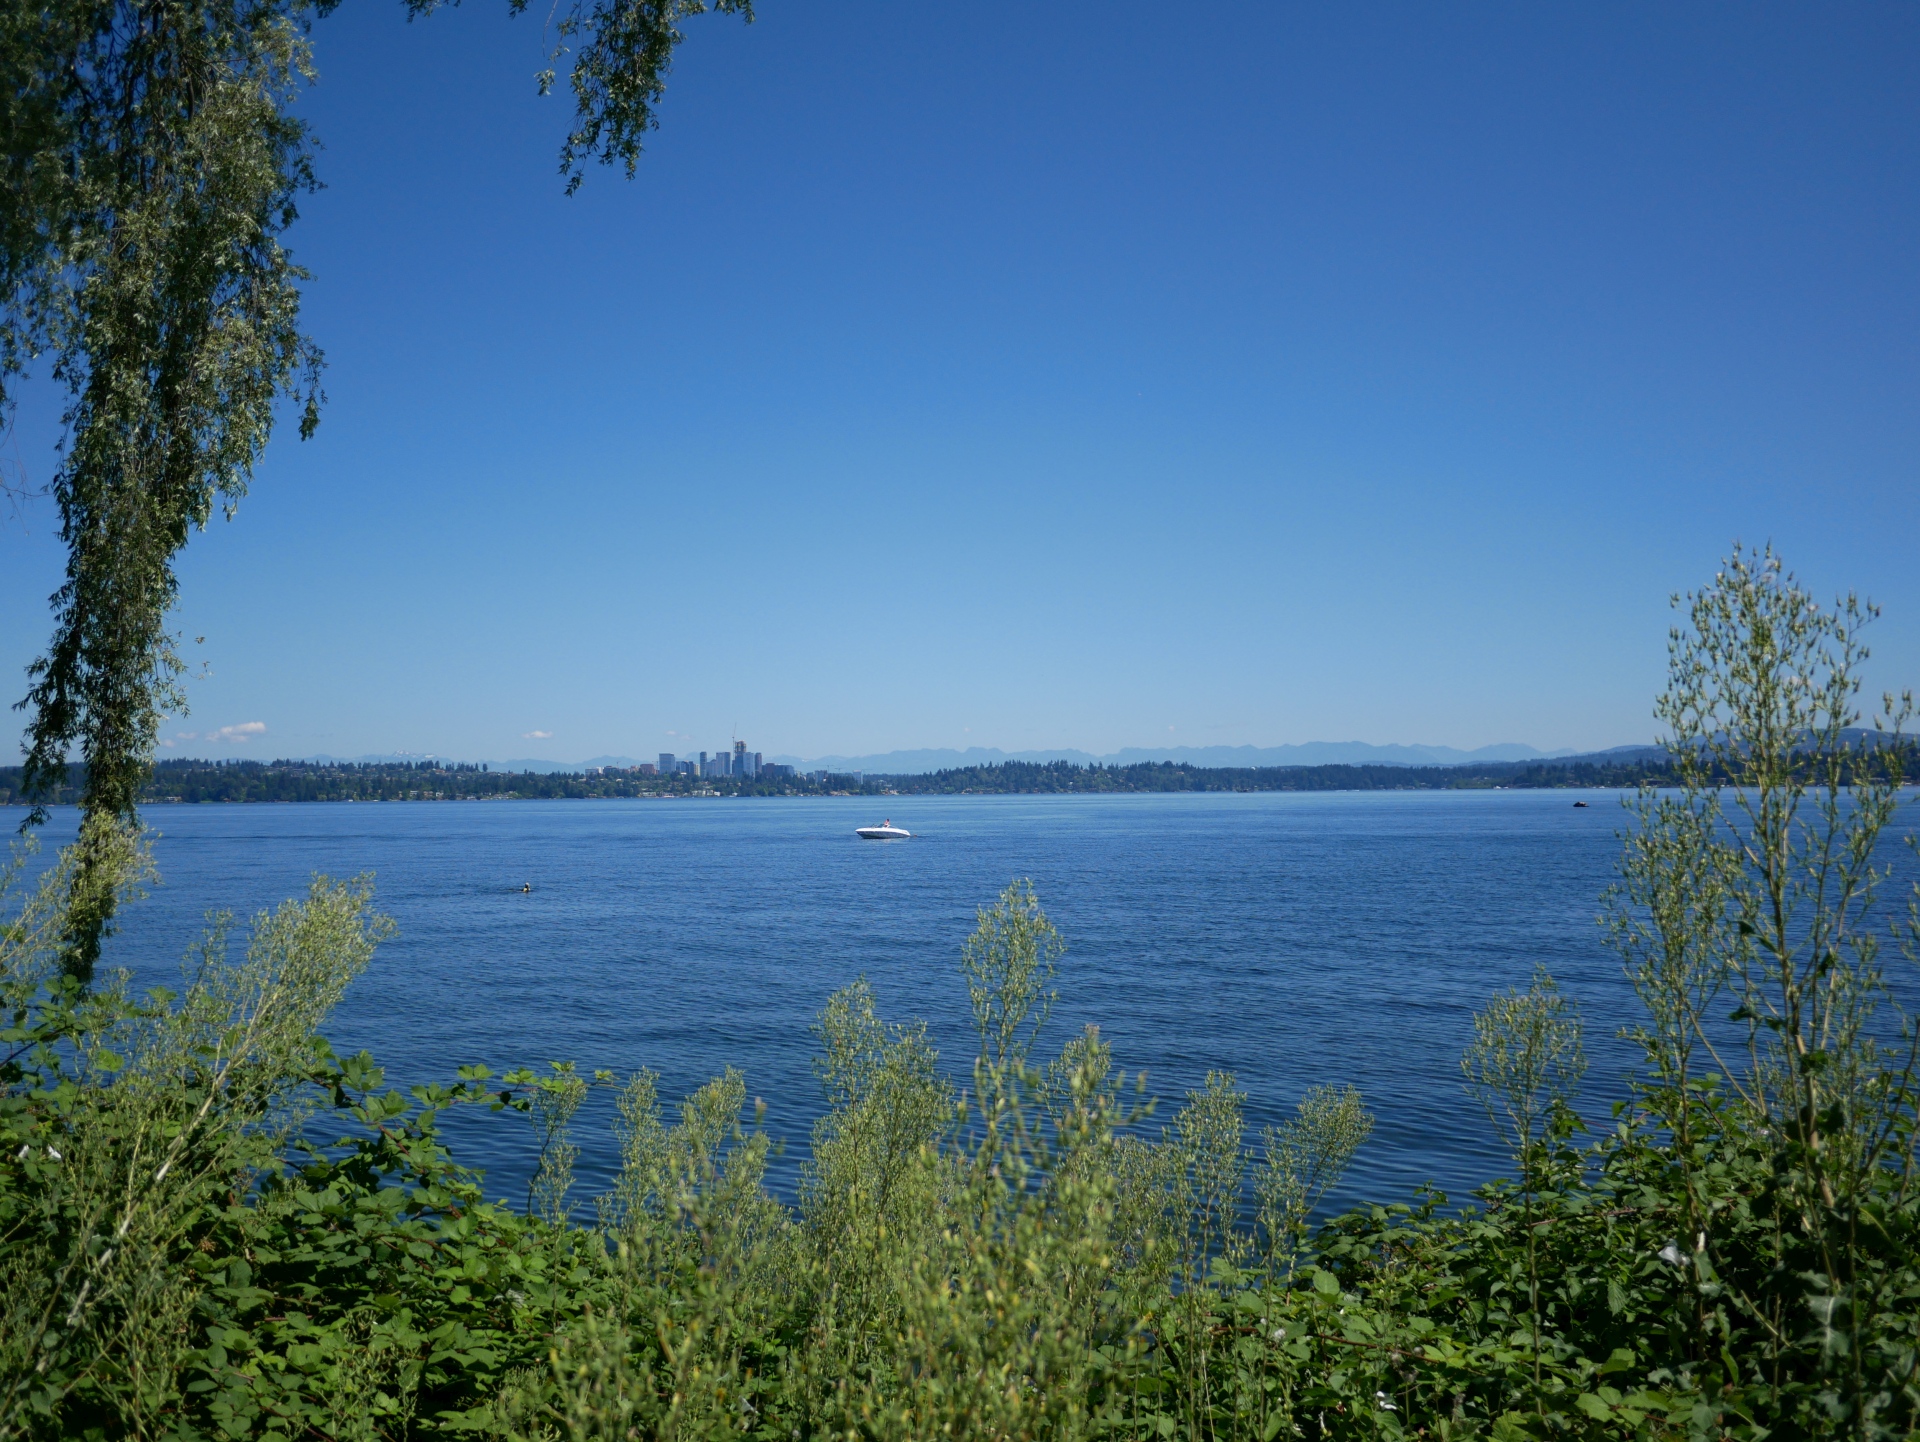 Look across the water, and you can see the skyline of Bellevue, a 'city' where I've been spending more time lately.